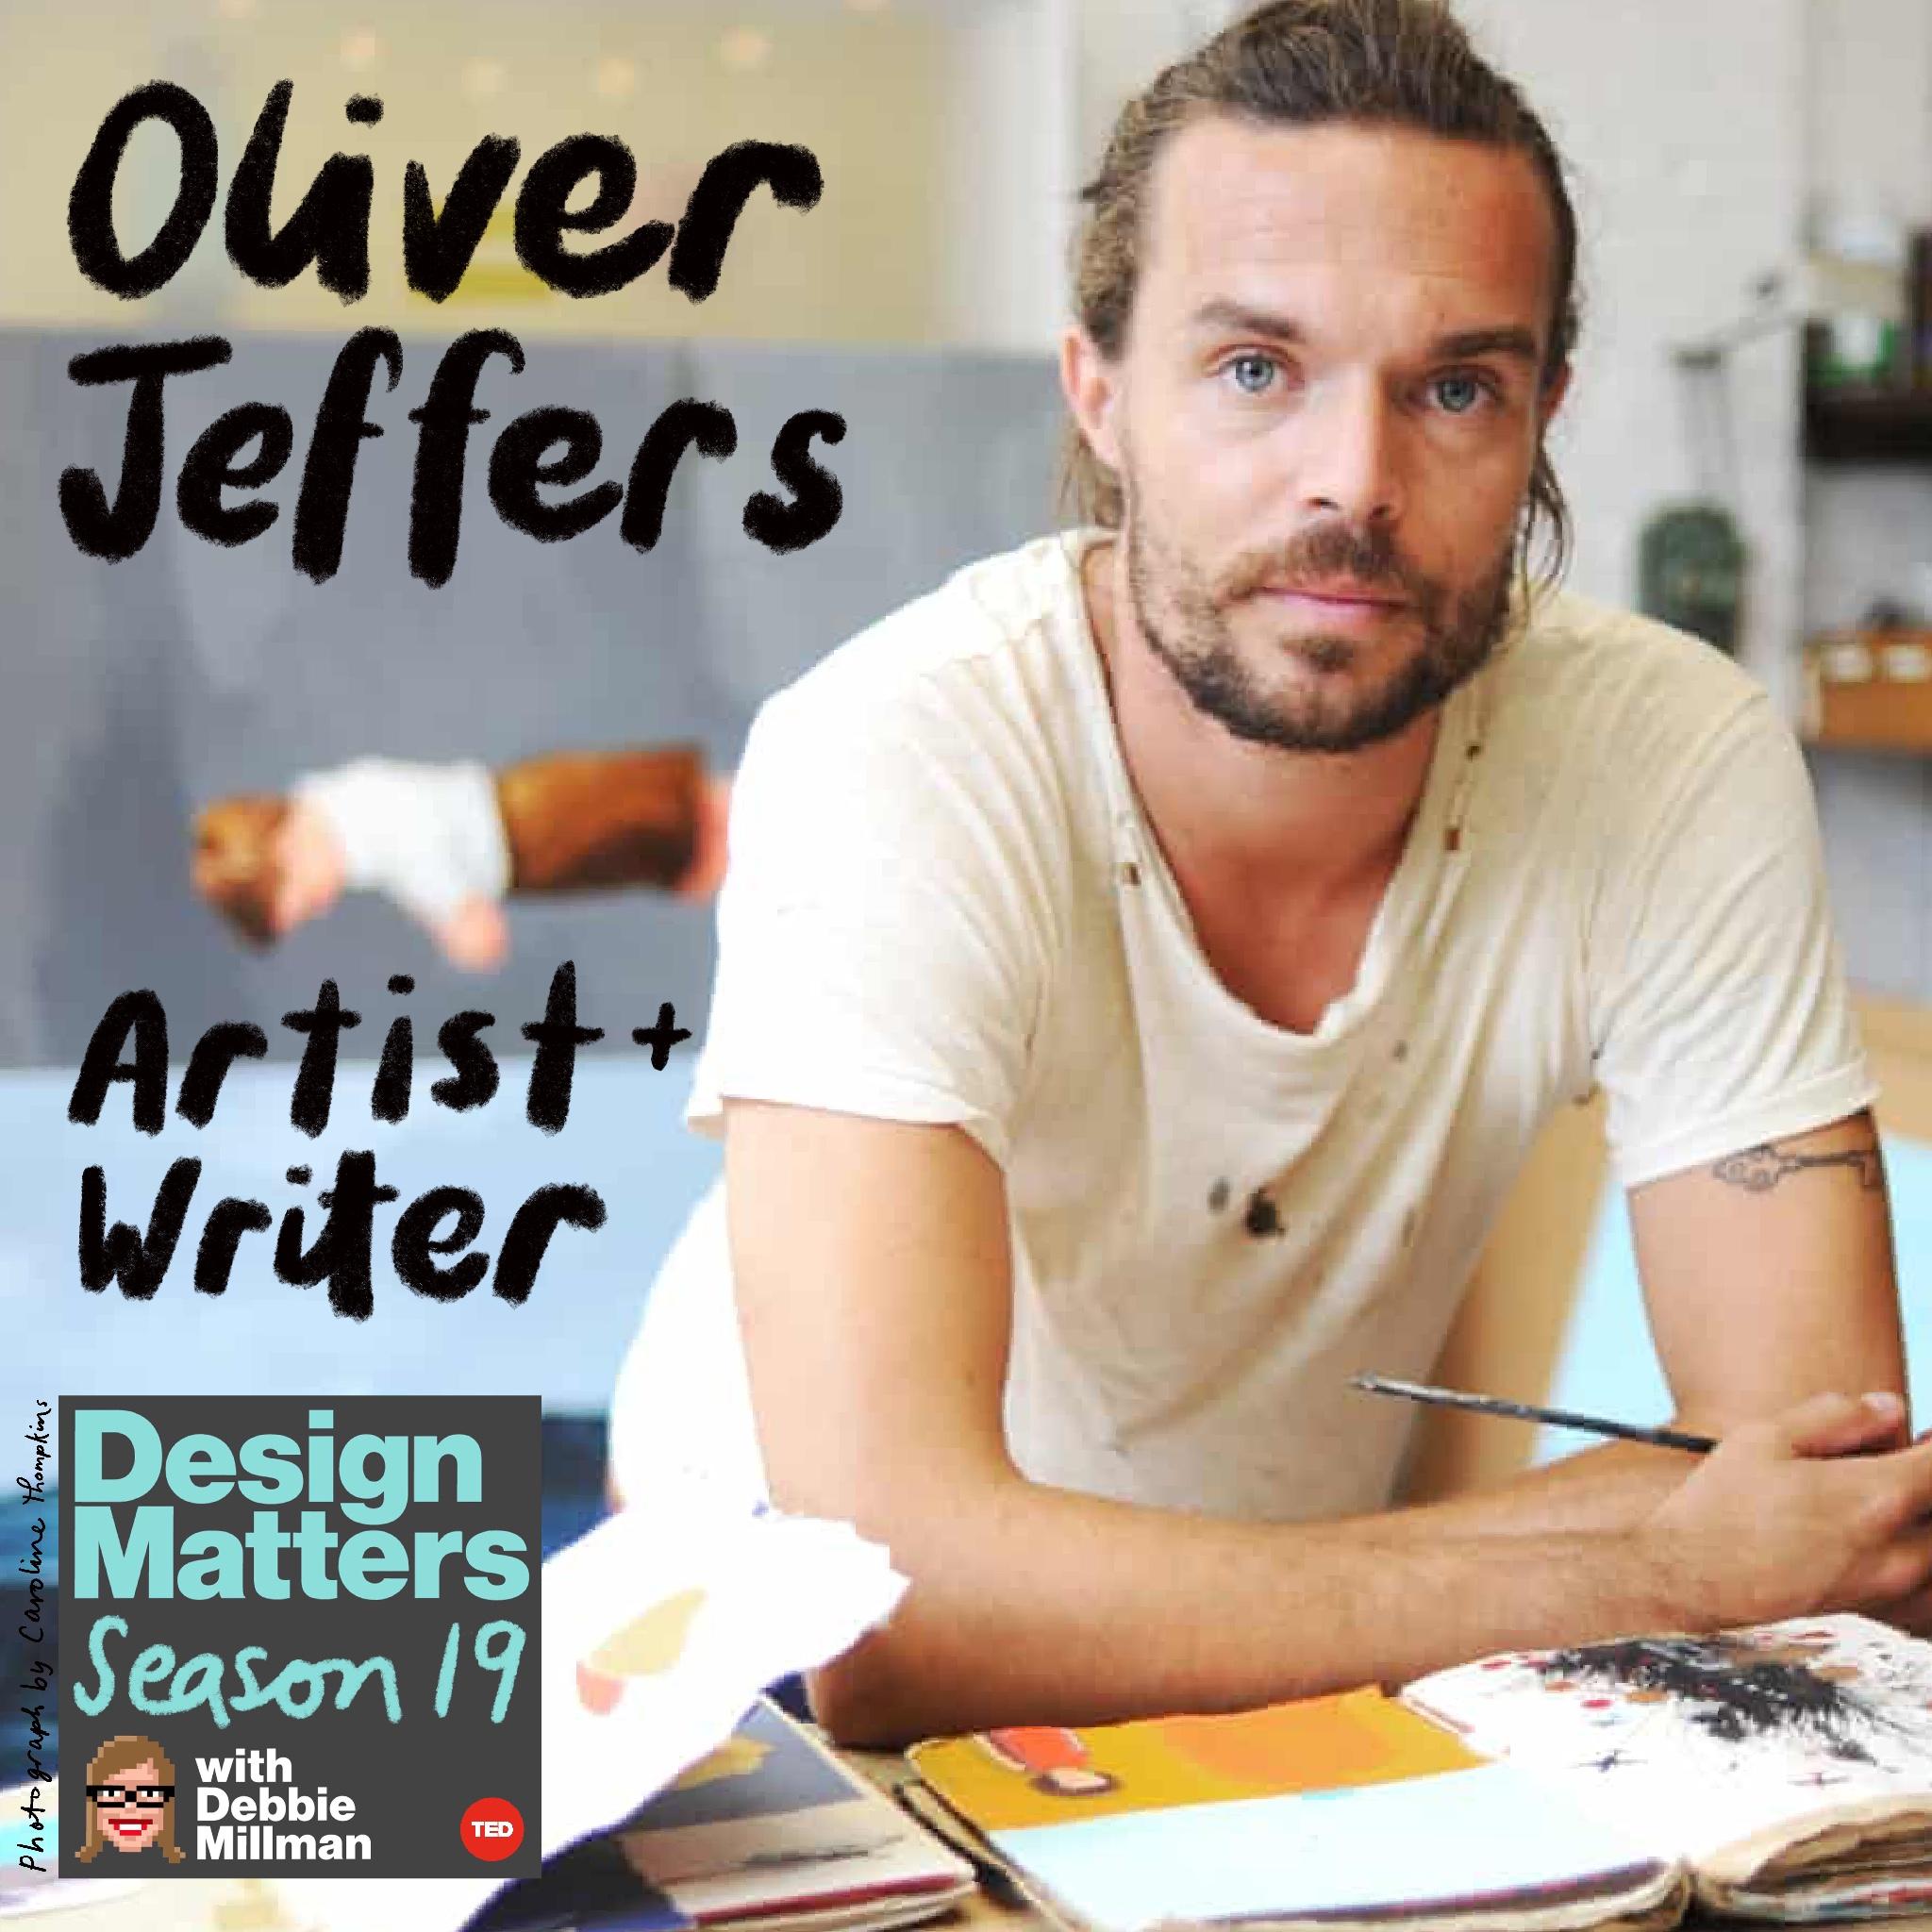 Thumbnail for "Best of Design Matters: Oliver Jeffers".